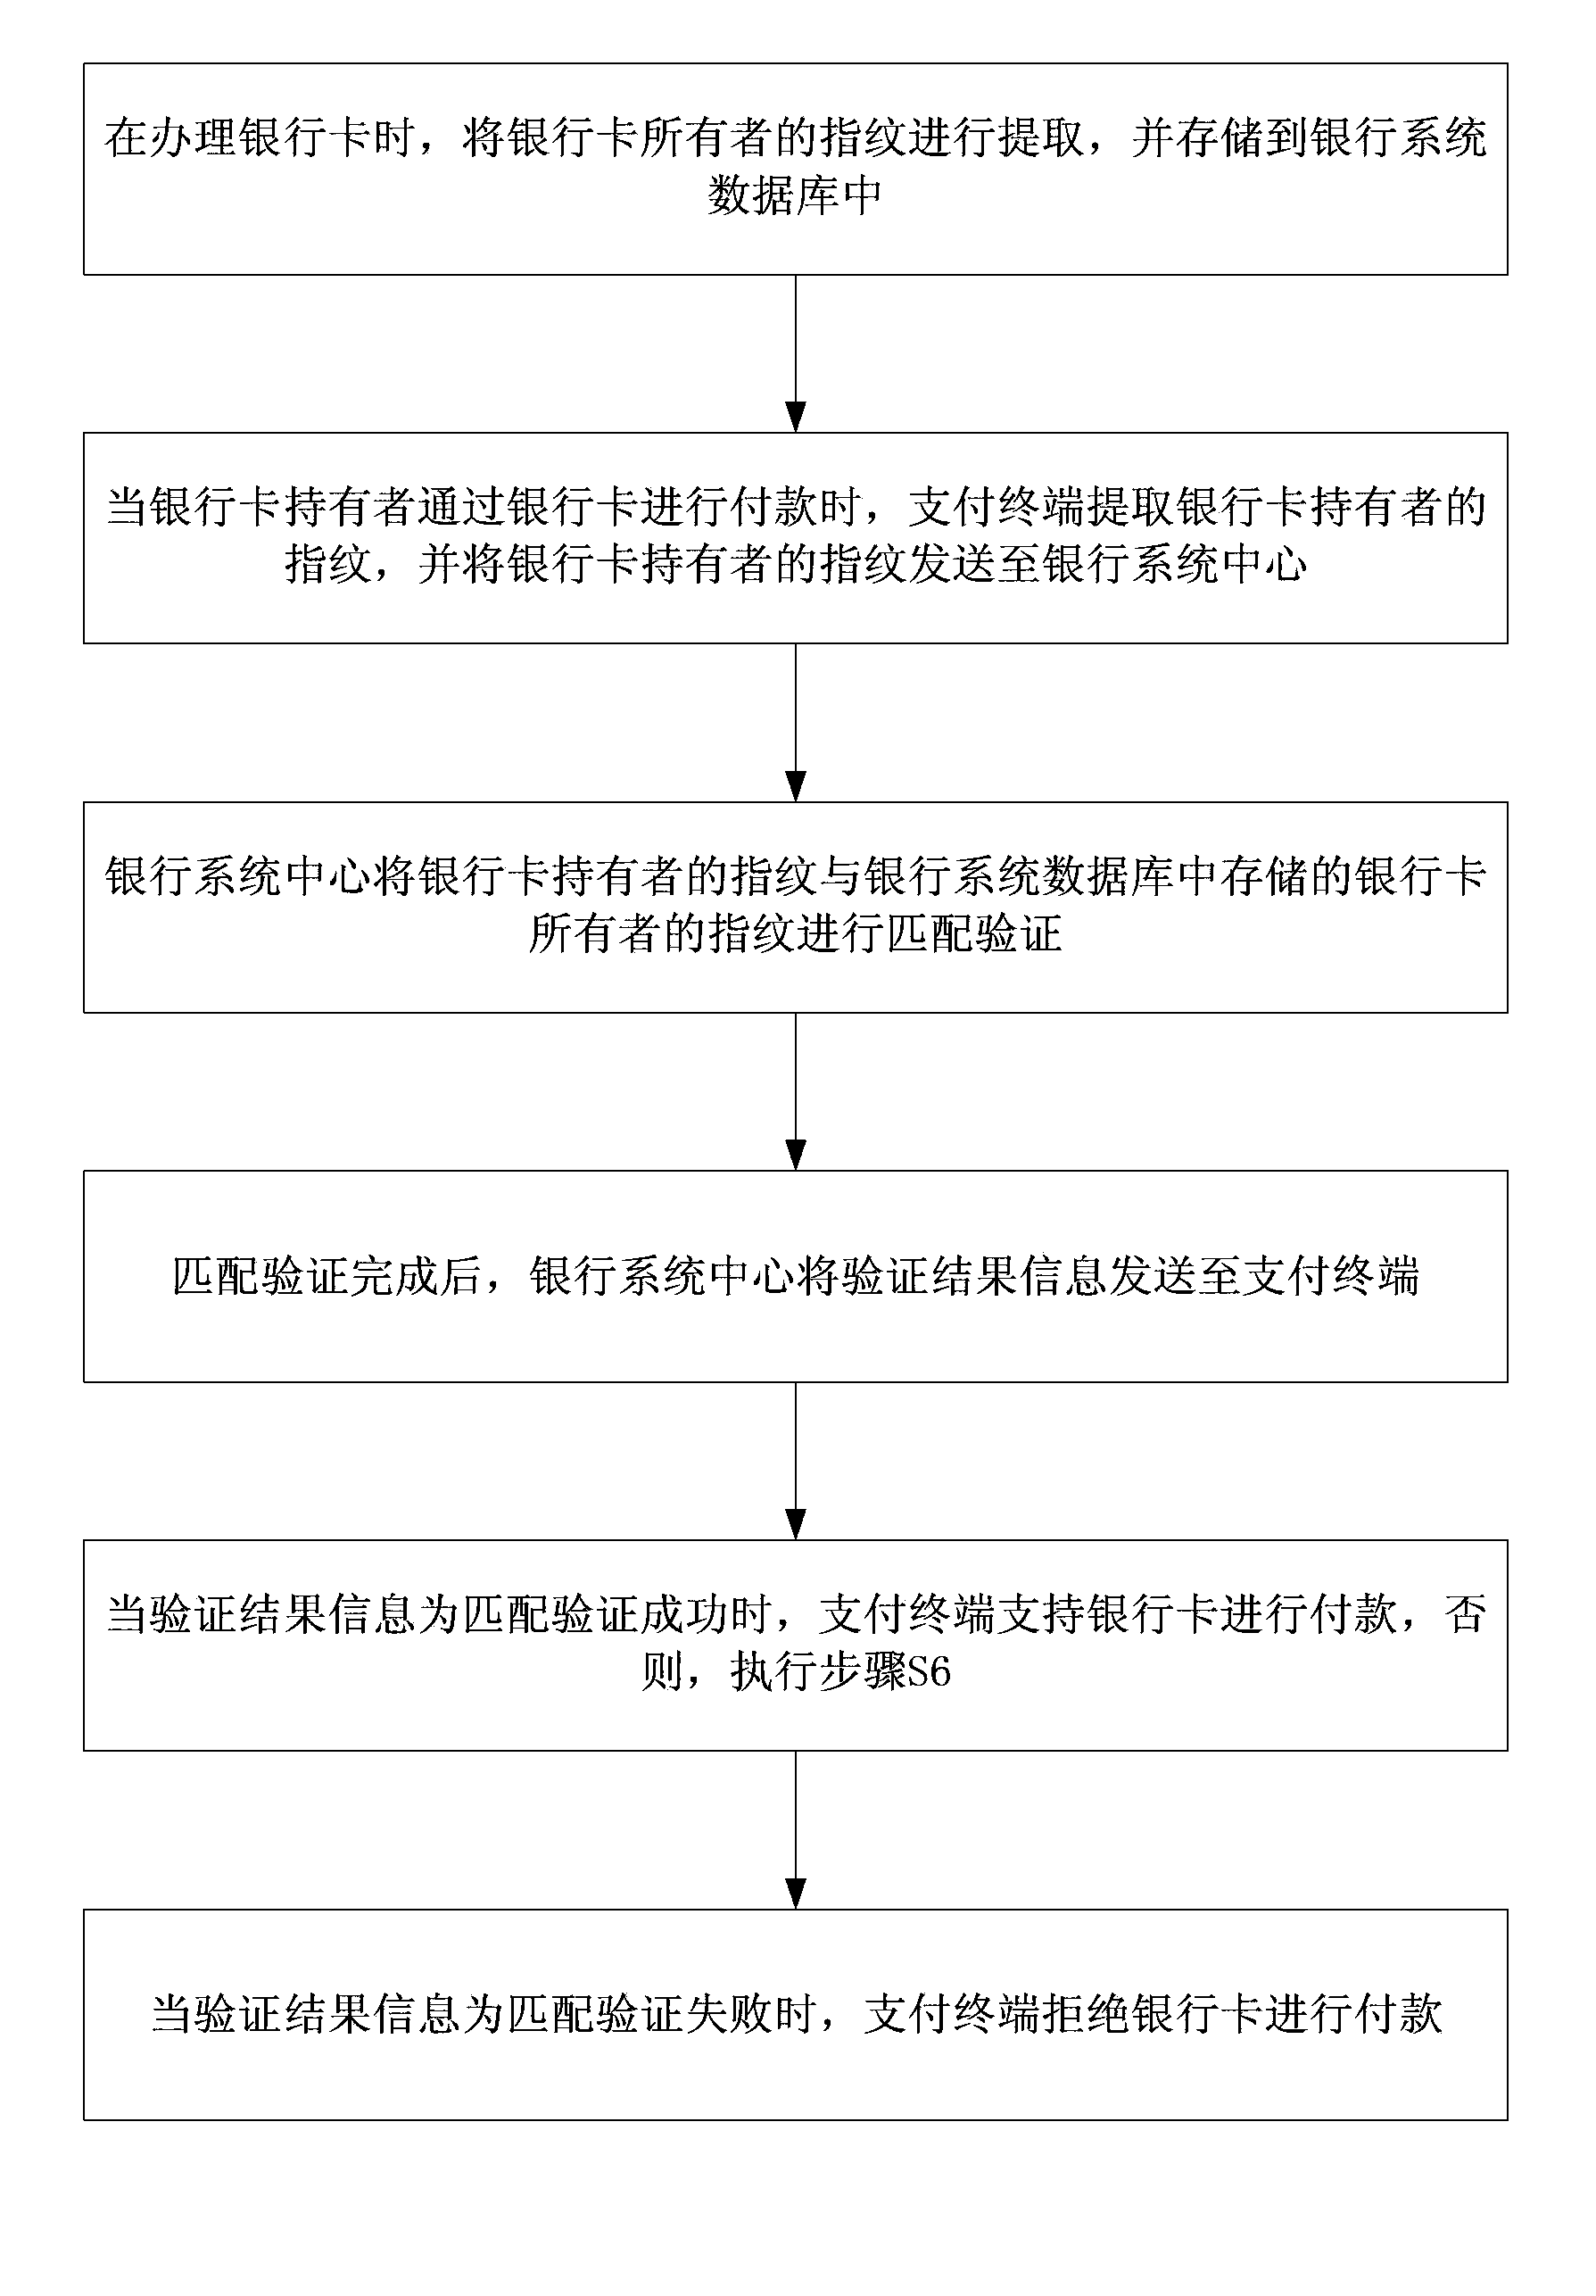 Authentication method for carrying out identity authentication on bank card holder on basis of fingerprint verification